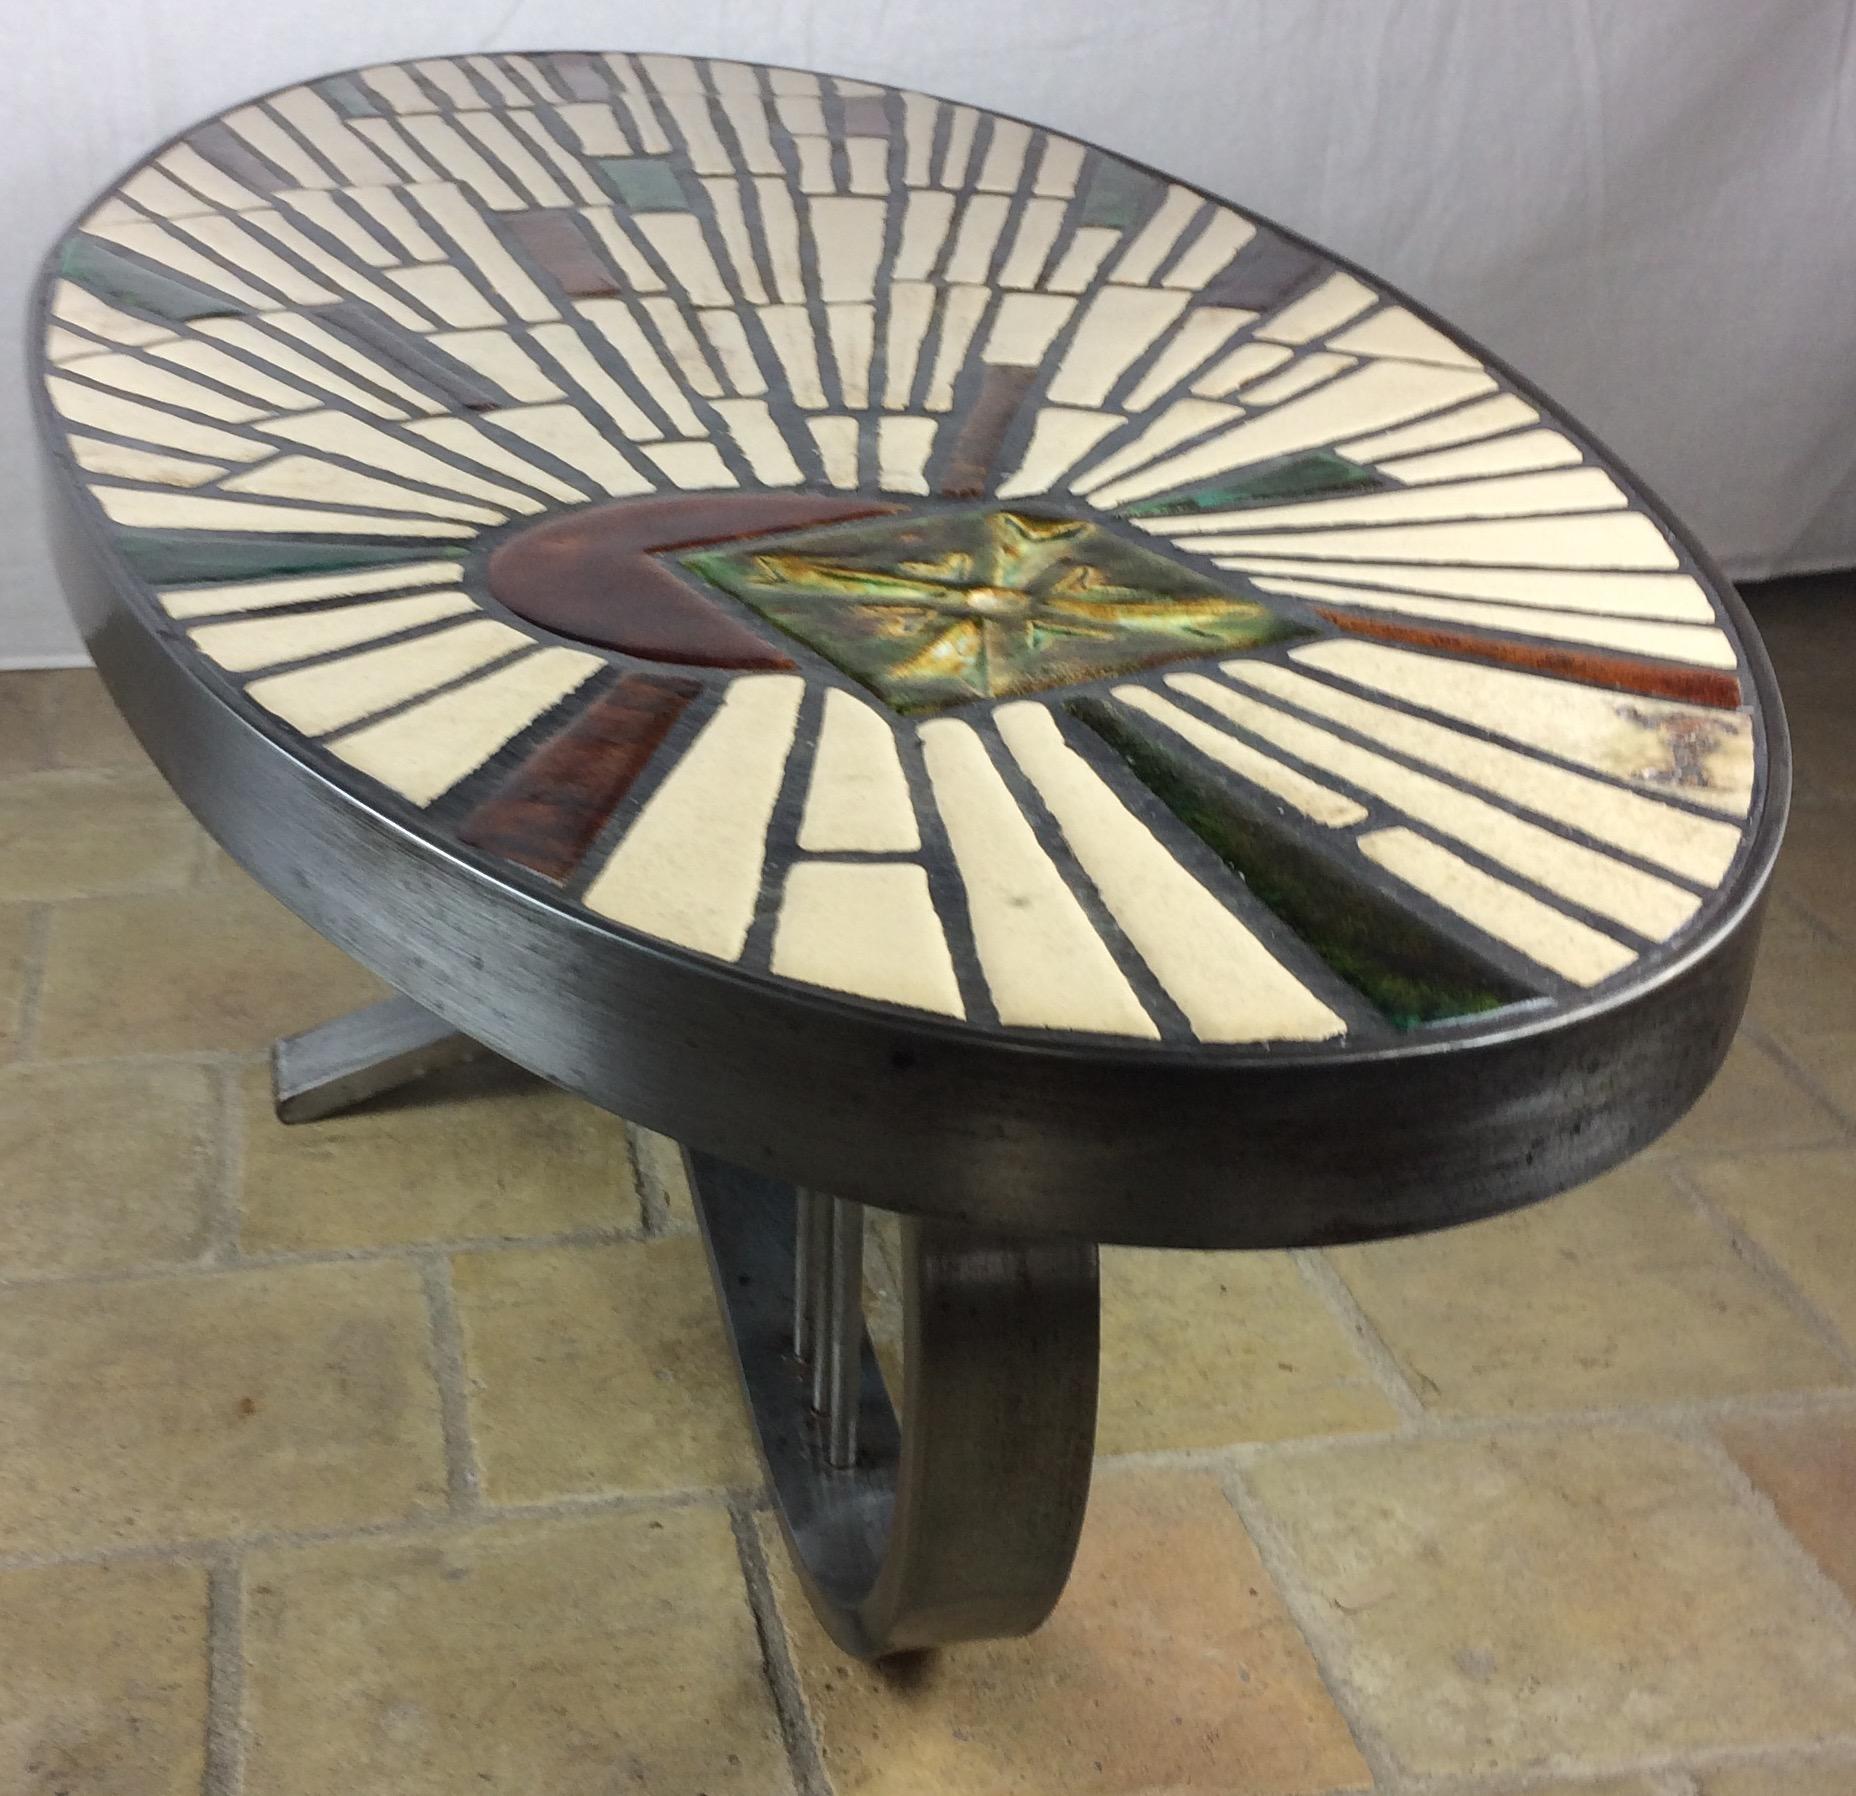 Stunning tile coffee table from Vallauris, France signed Barrois, circa 1960.
Handcrafted in the manner of Max & Dominique Picard or Roger Capron. 

This oval coffee table consists of a mosaic top of enameled stoneware elements. The base is made of